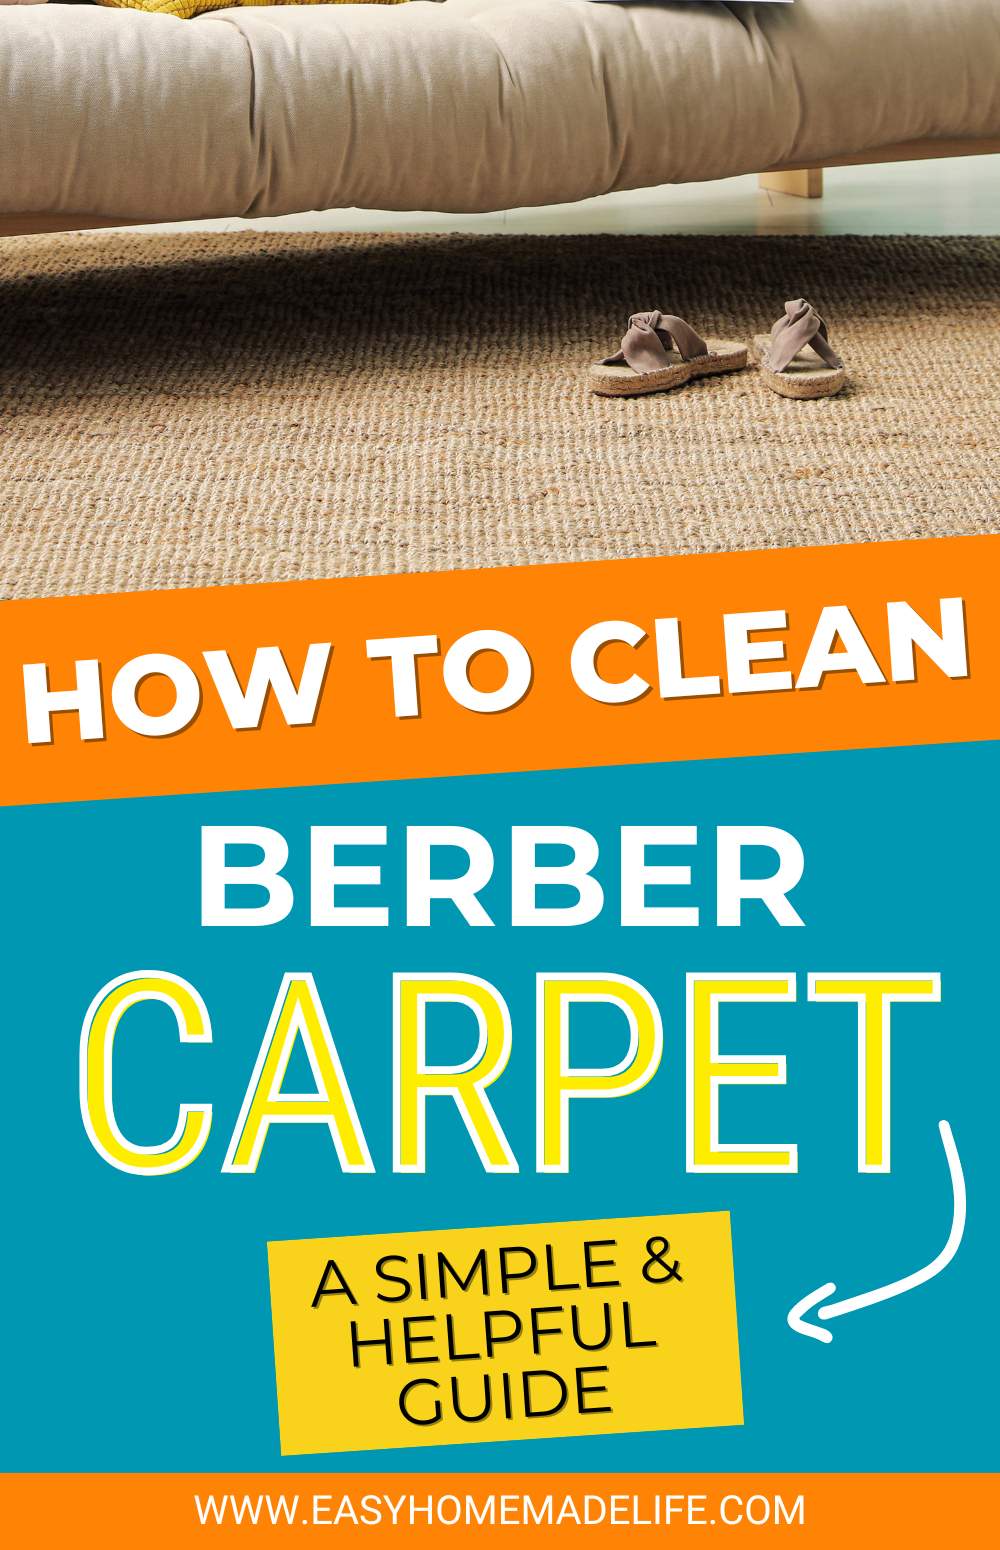 How to clean berber carpet. A simple and helpful guide.